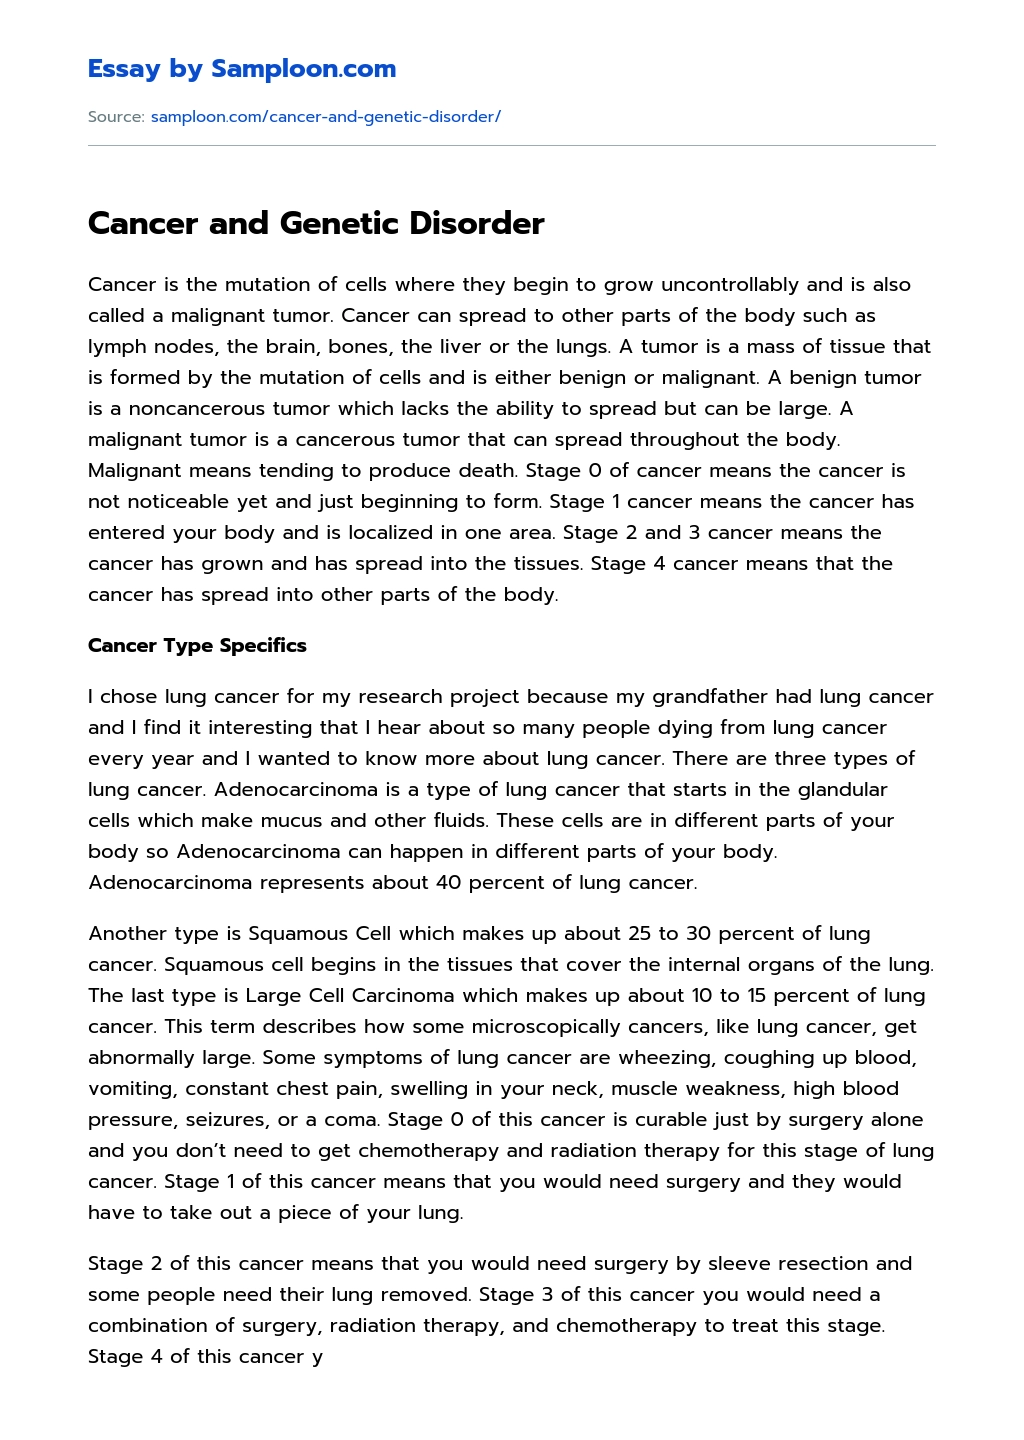 Cancer and Genetic Disorder essay